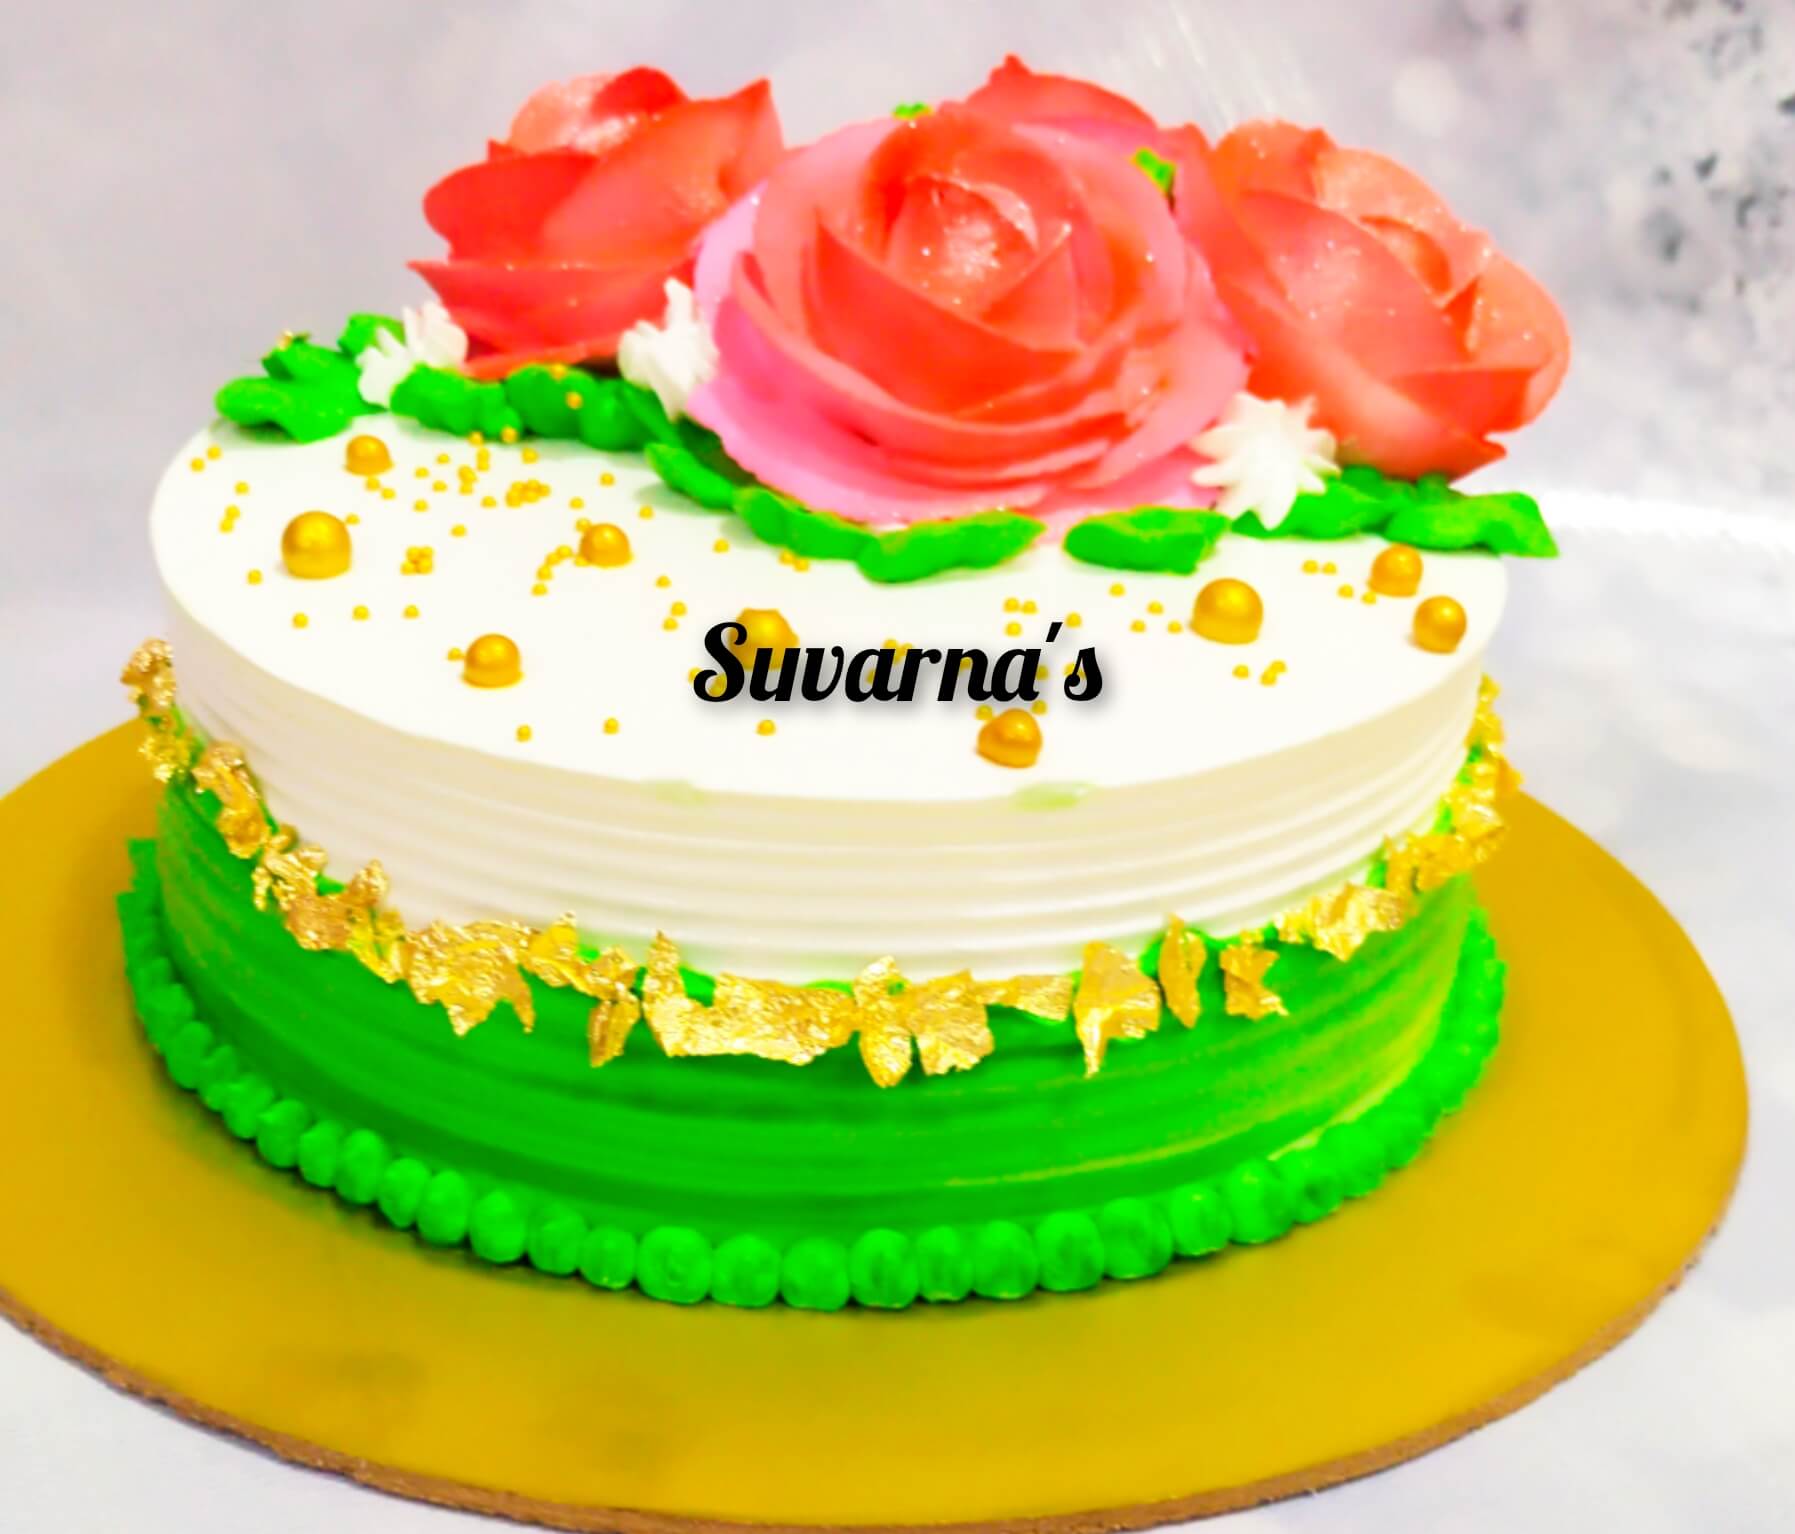 Rose Special Birthday Cake Designs, Images, Price Near Me